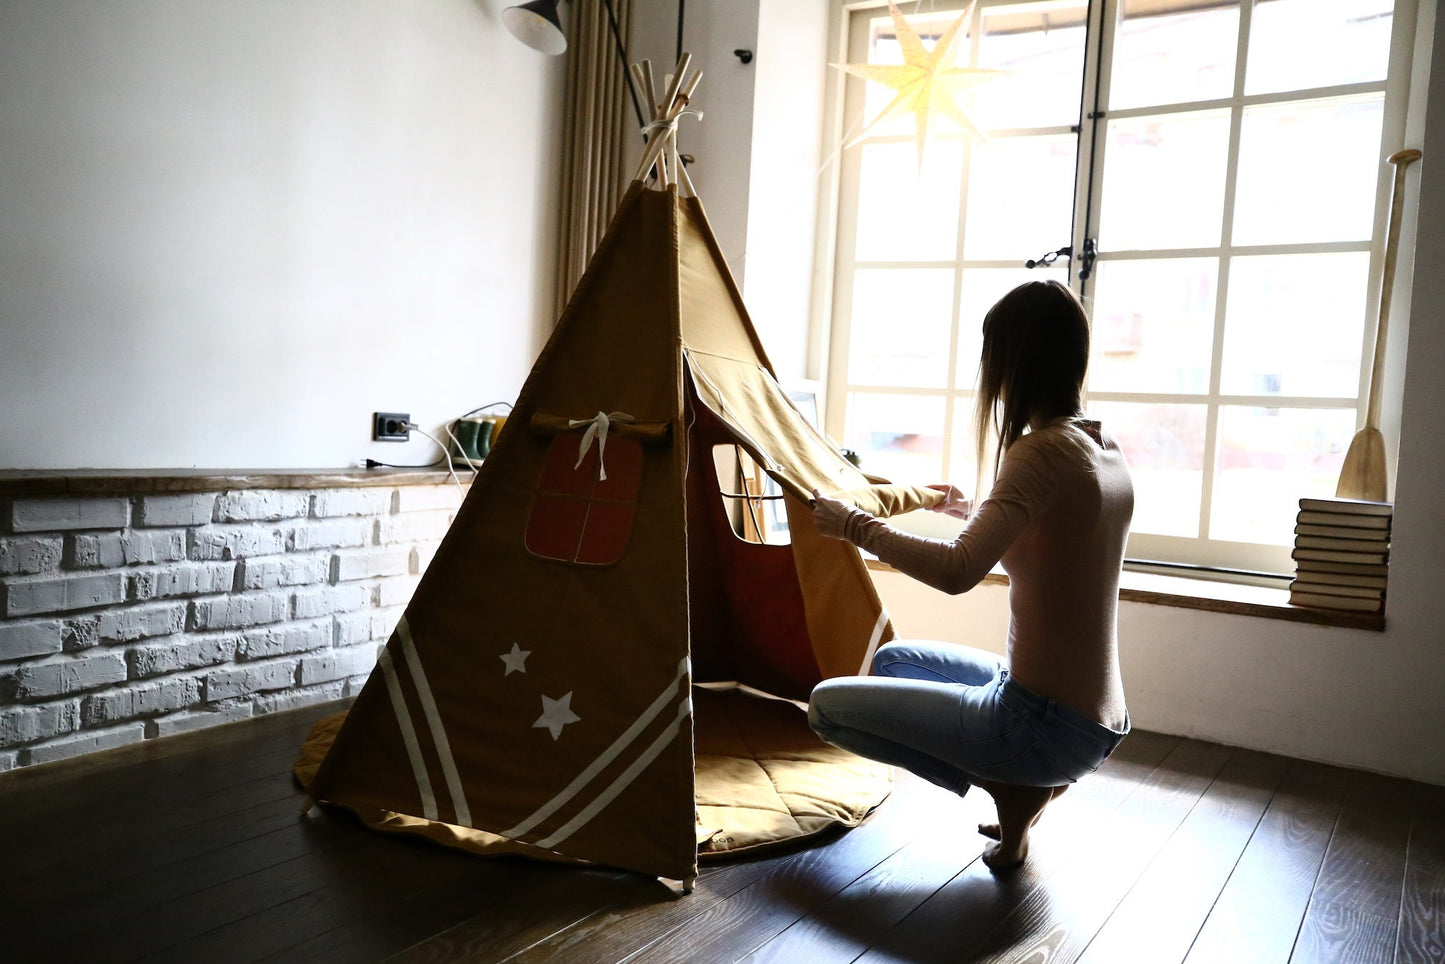 Childrens Indoor Playhouse | Army Tent | Indian Tipi Tent | Boys Play Houses | Native Teepee | Childrens Indoor Teepee - 1st birthday